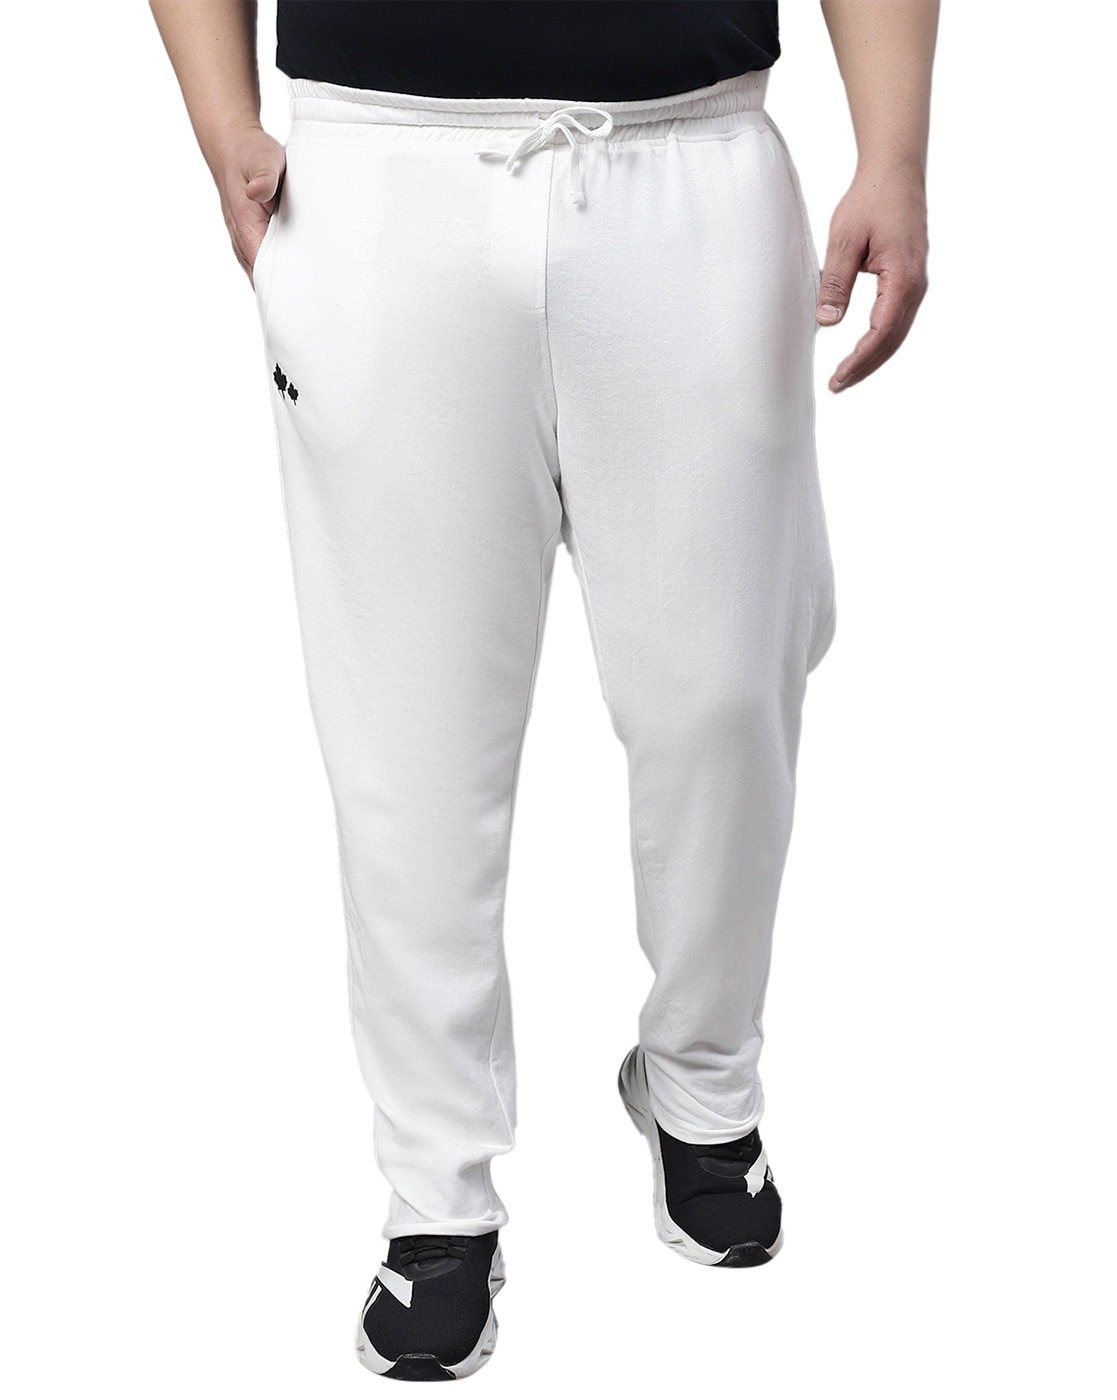 Authentic Scar Track Pants in White - Glue Store